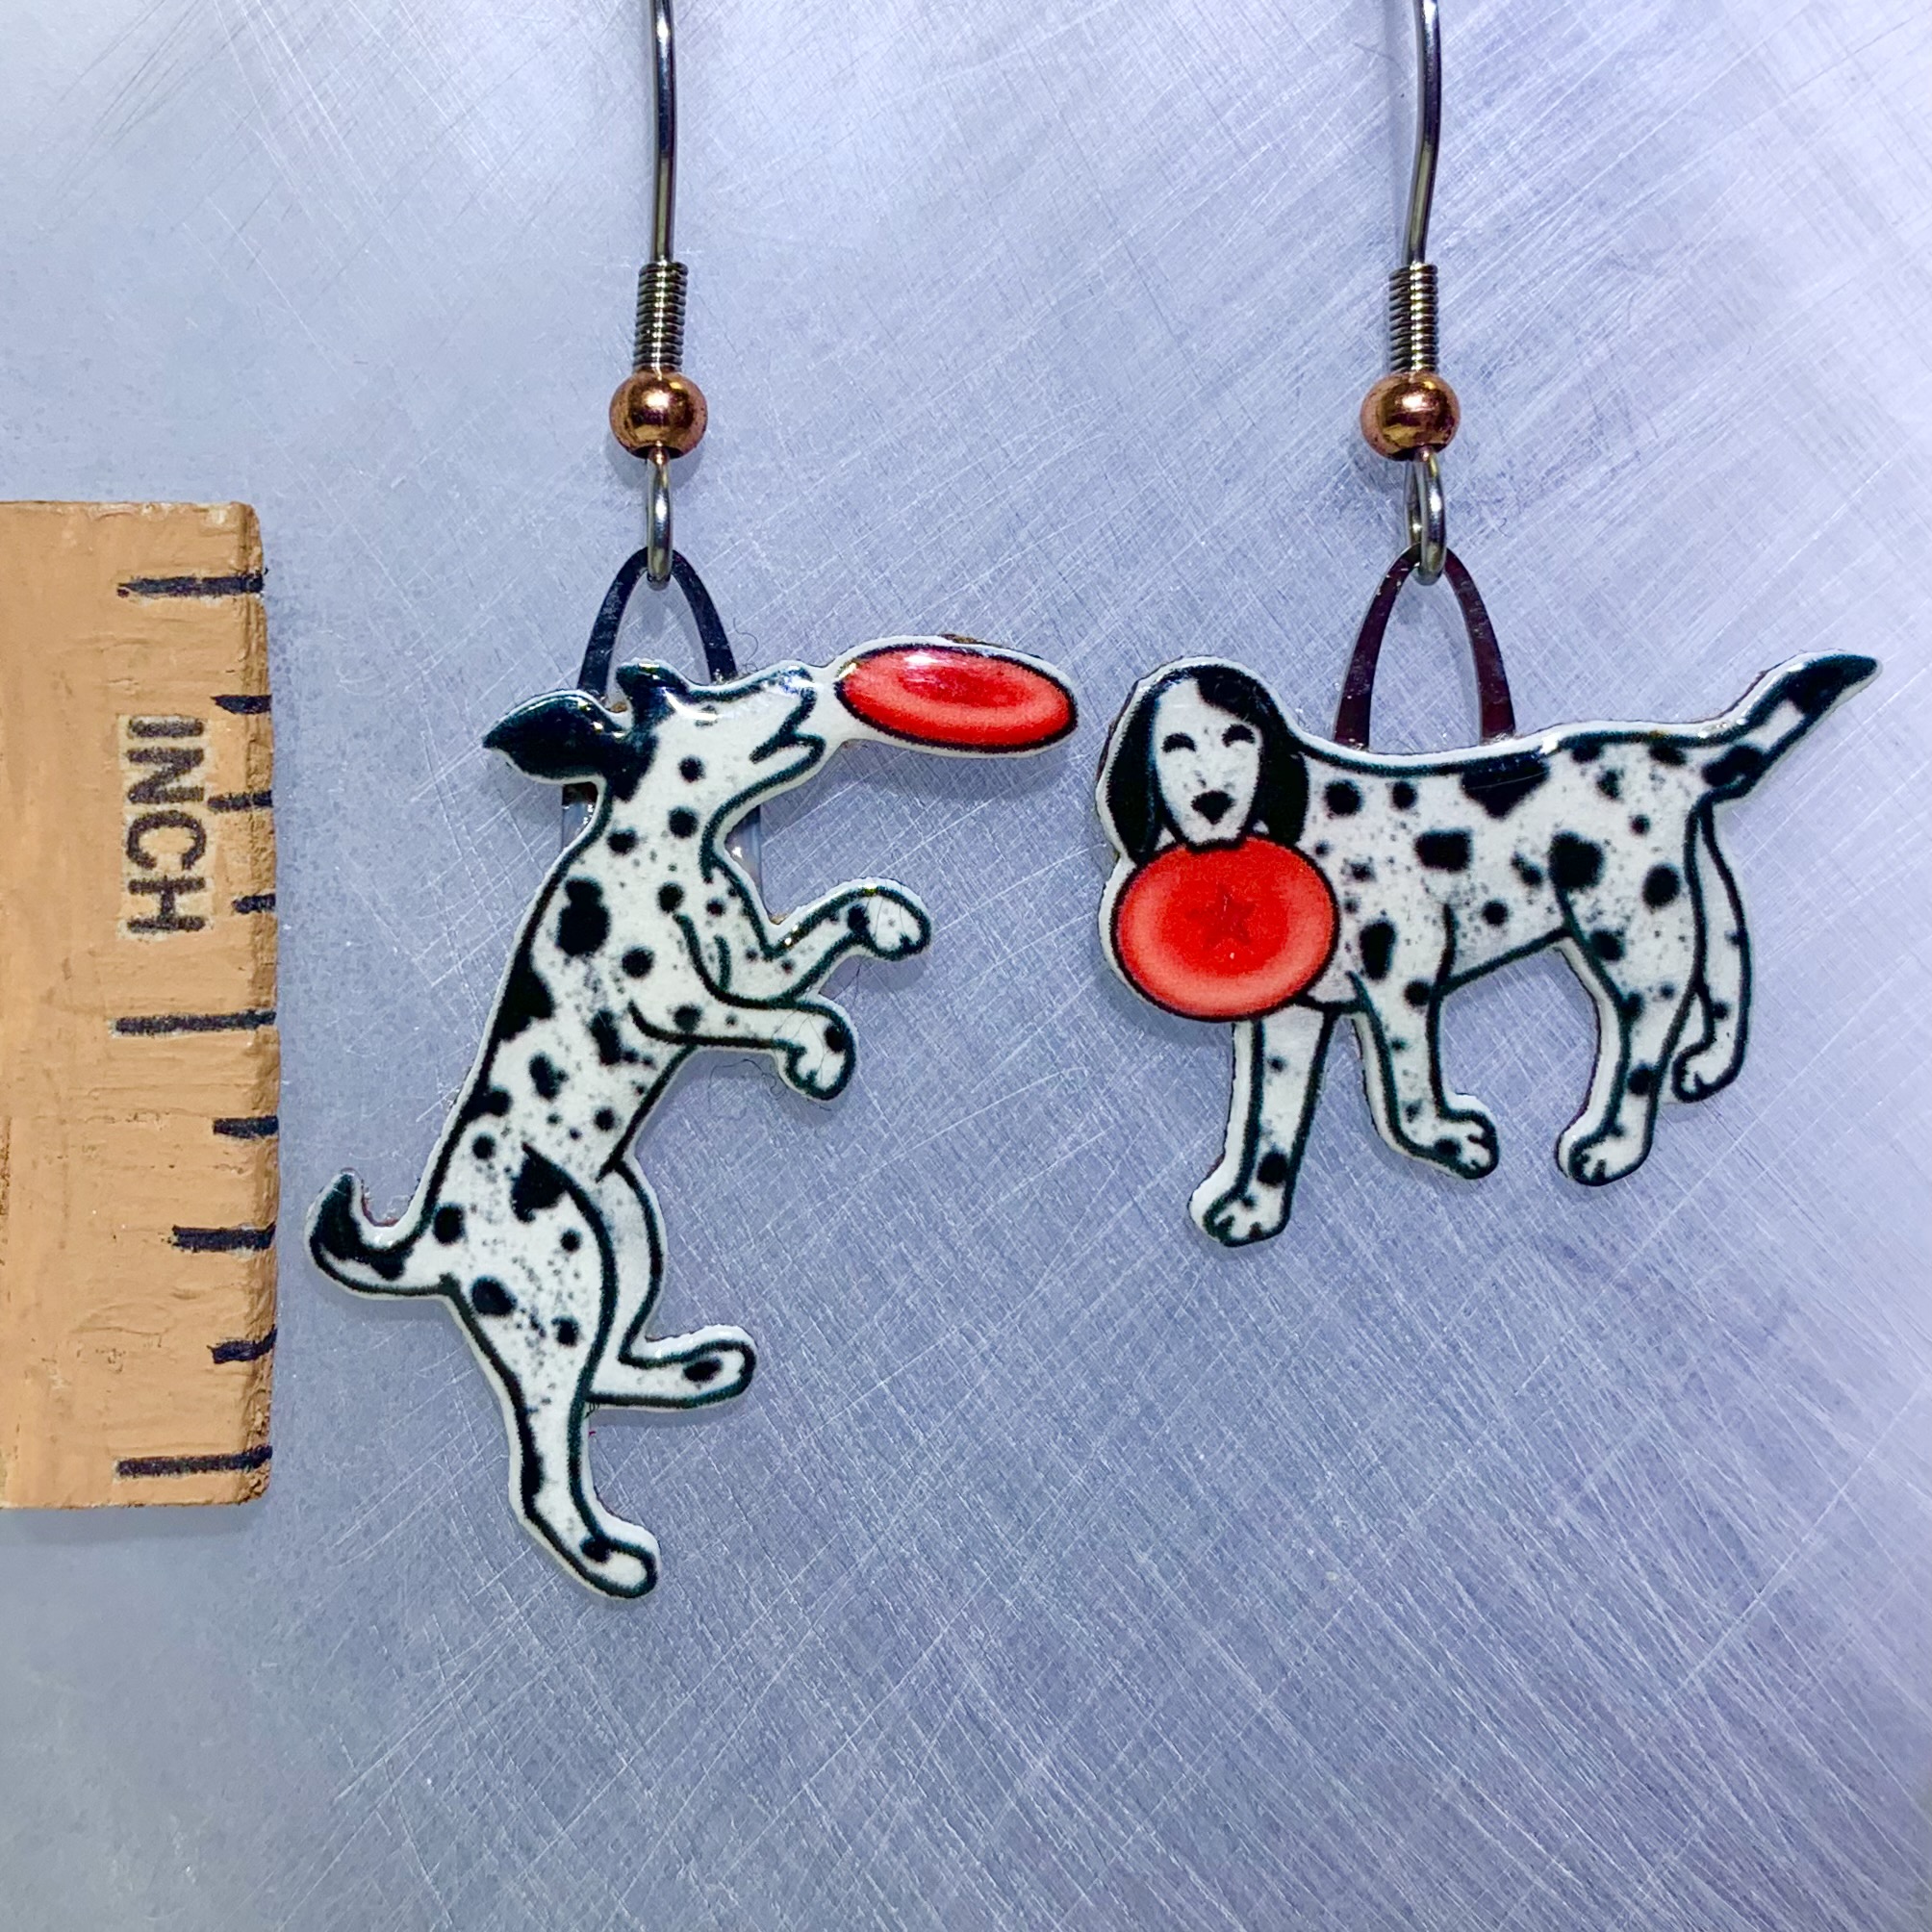 Picture shown is of 1 inch tall pair of earrings of the pet the Dog & Frisbee.